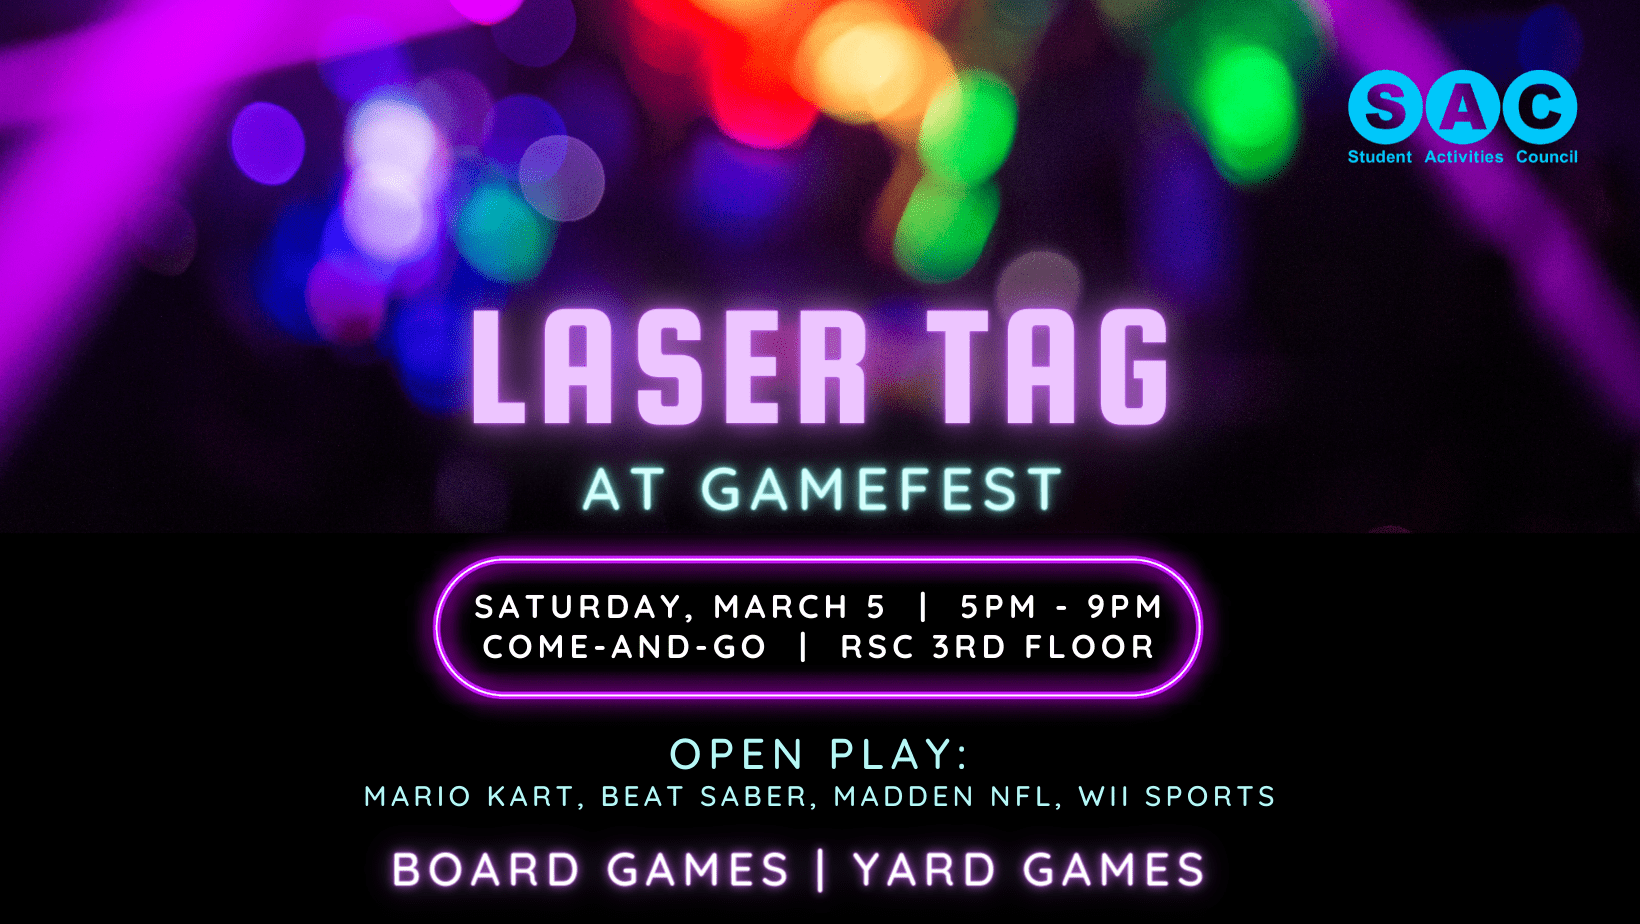 Laser Tag at Gamefest will be held at the Rhatigan Student Center 3rd Floor. This event is free and is come-and-go from 5pm to 9pm on Saturday, March 5, 2022. Register for 6-on-6 laser tag or enjoy open play board games, yard games, mario kart, madden nfl, wii sports, or beat saber! This event is sponsored by Student Activities Council. Register for laser tag at https://www.signupgenius.com/go/5080a4aa5a62aa5f94-gamefest1.